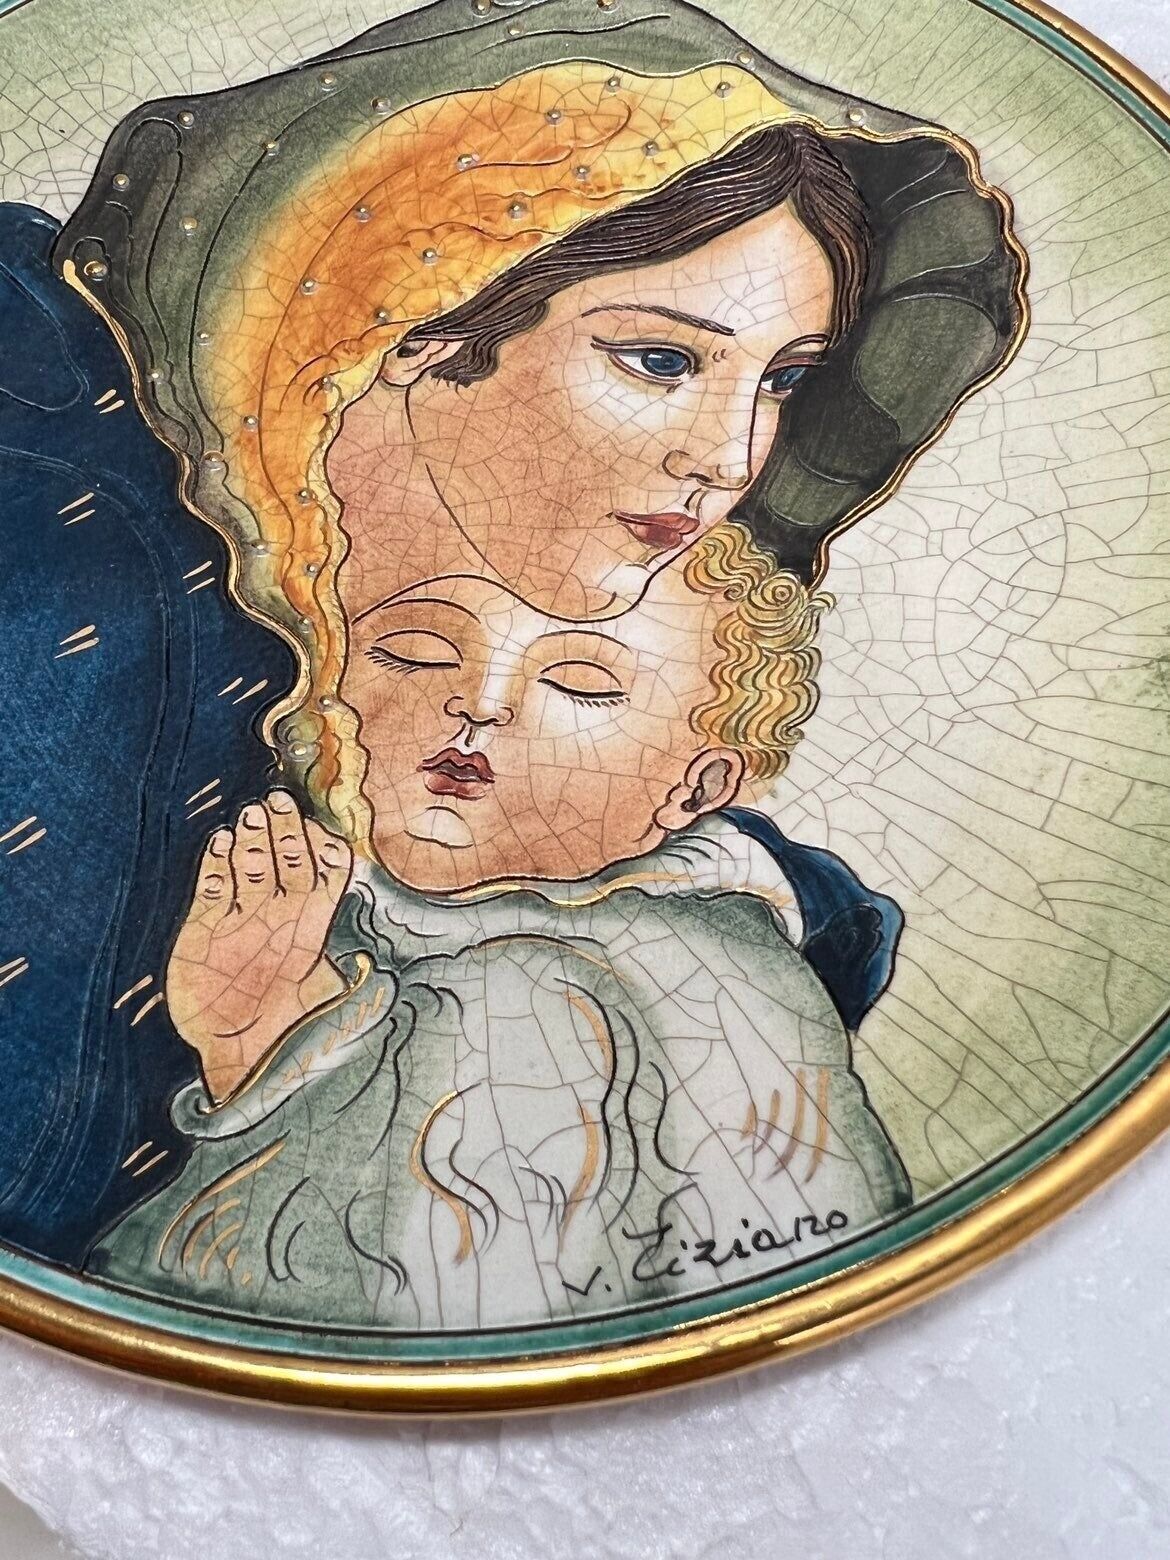 Fontana Plate Mother's Day 1973 Mother and Child 8.5" Collector Plate Italy